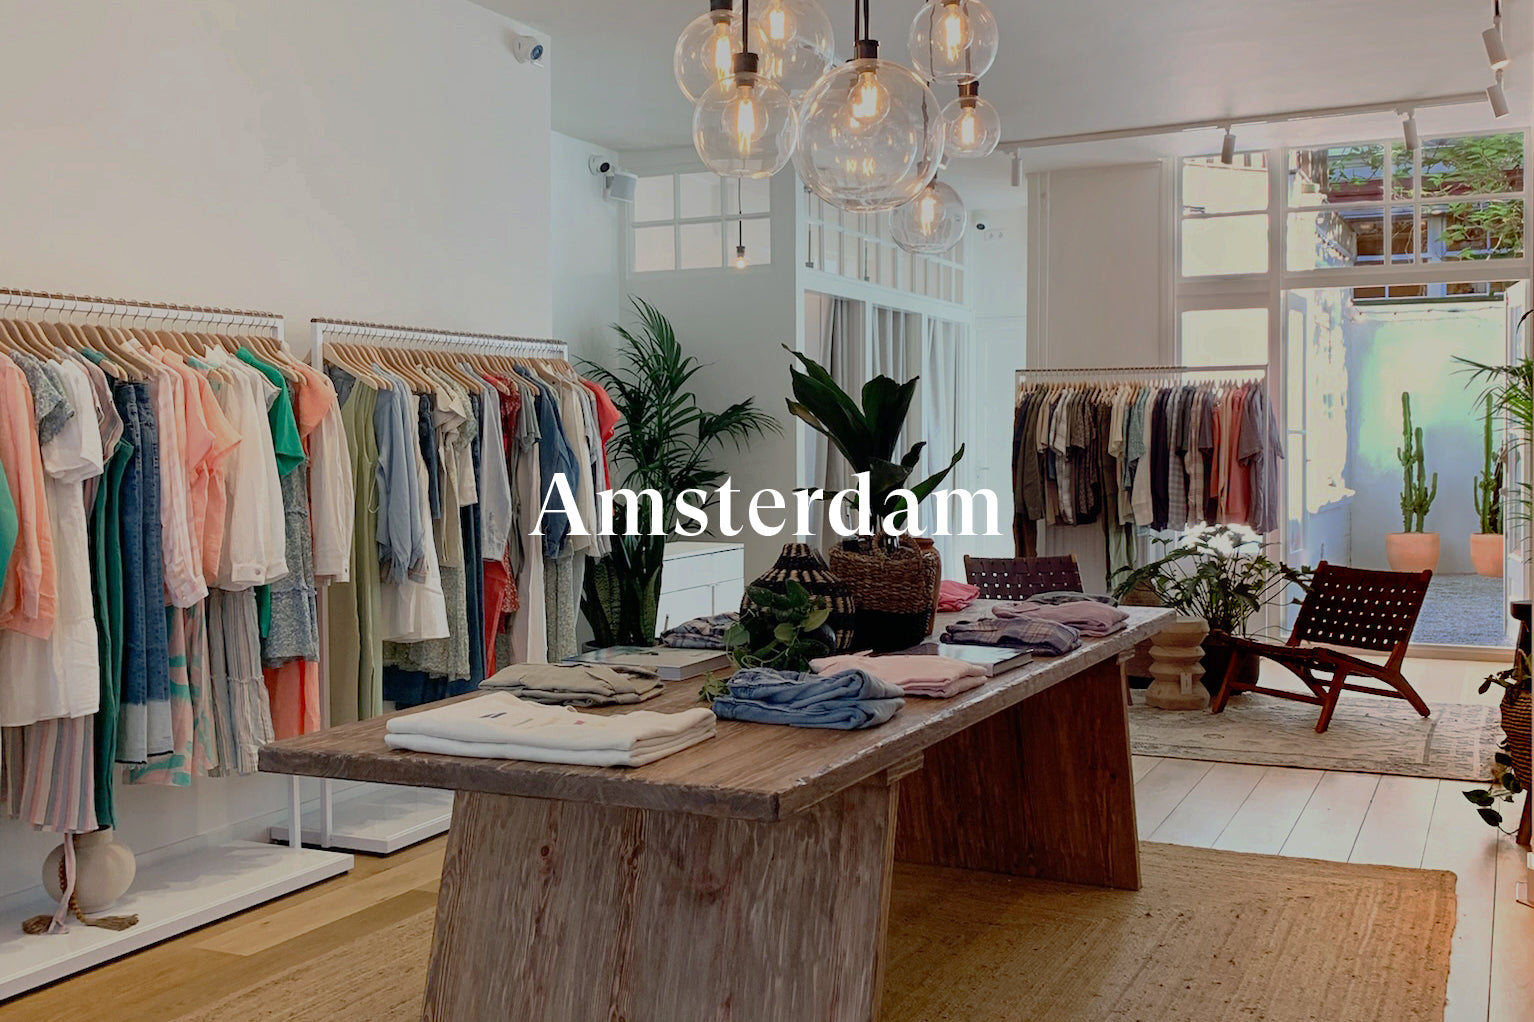 IMAGE SHOWS INSIDE OF AMSTERDAM STORE